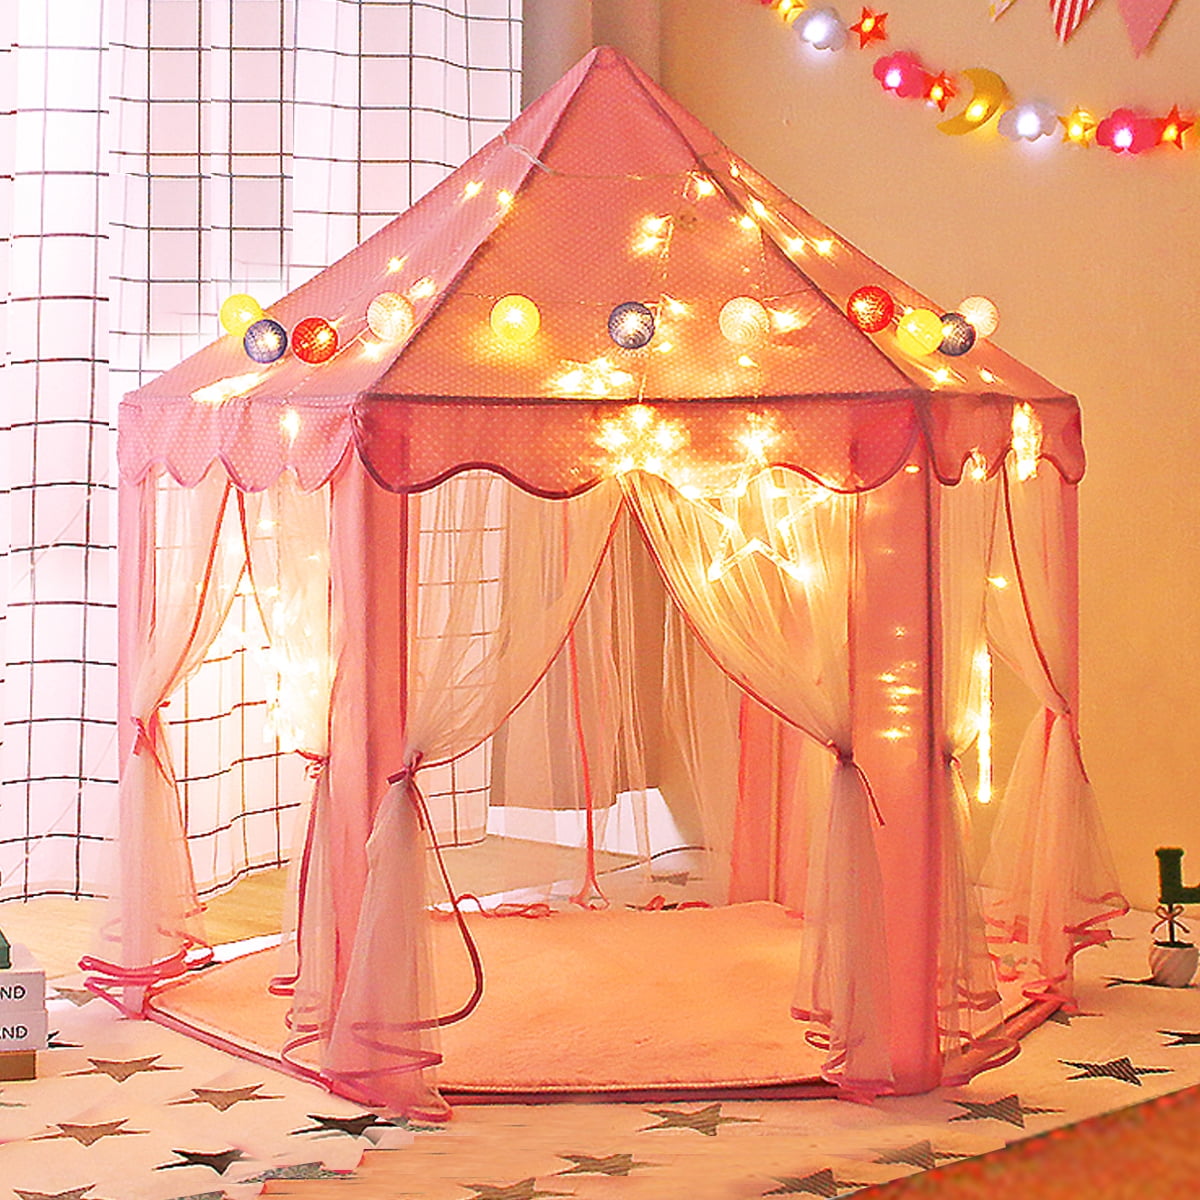 Princess Castle Protable Large Playhouse Indoor Outdoor Kid Play Soft Game Tent 